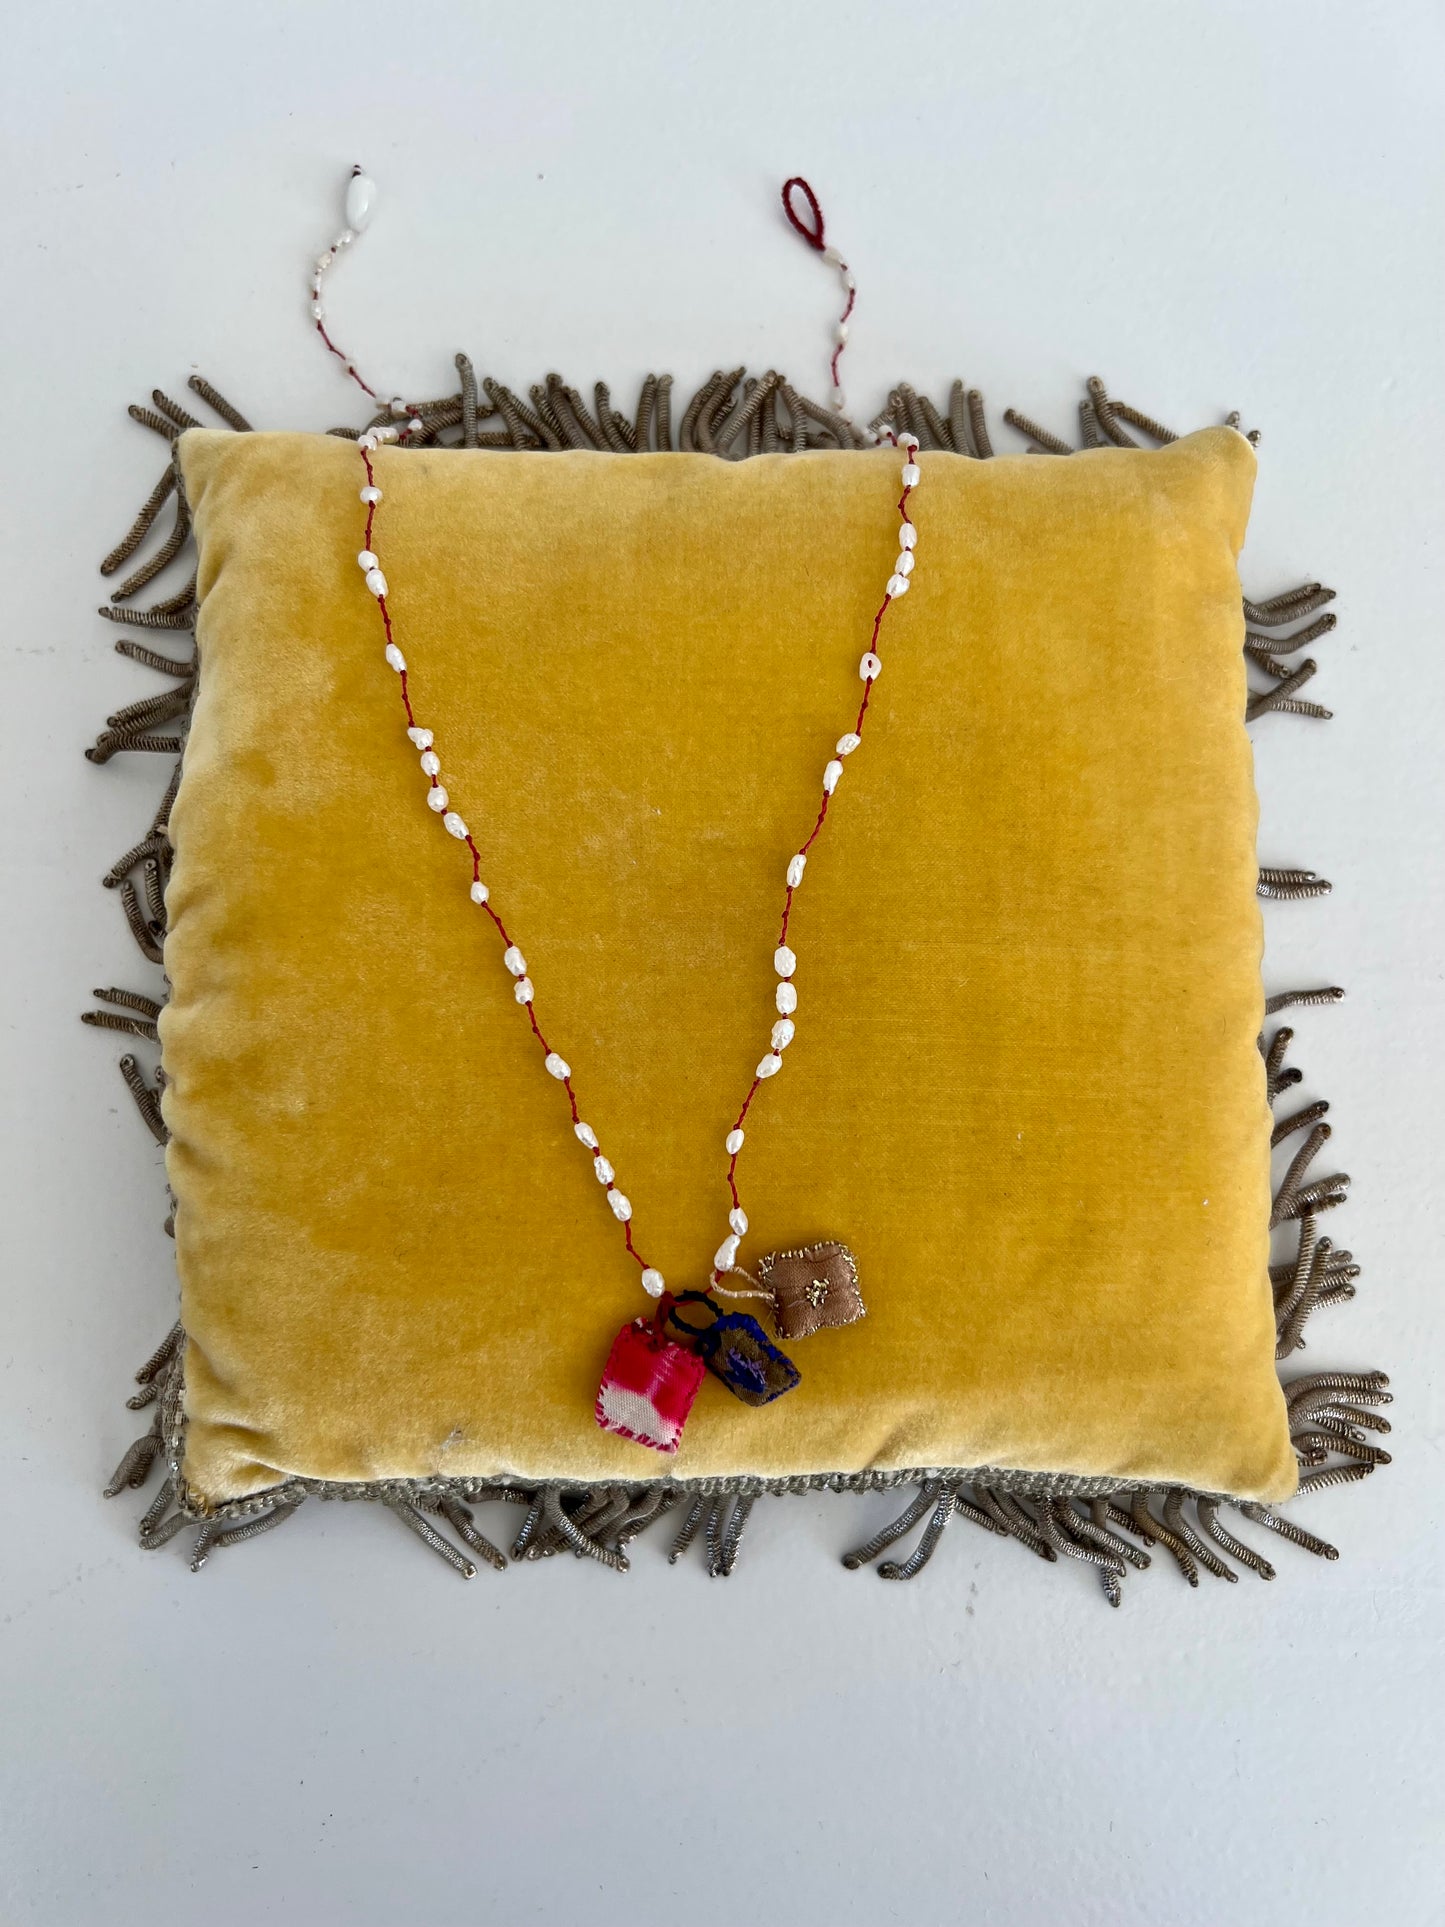 Necklace - ‘Sophia’ Mother Pearl necklace with tie and dye red, brown,  cushions